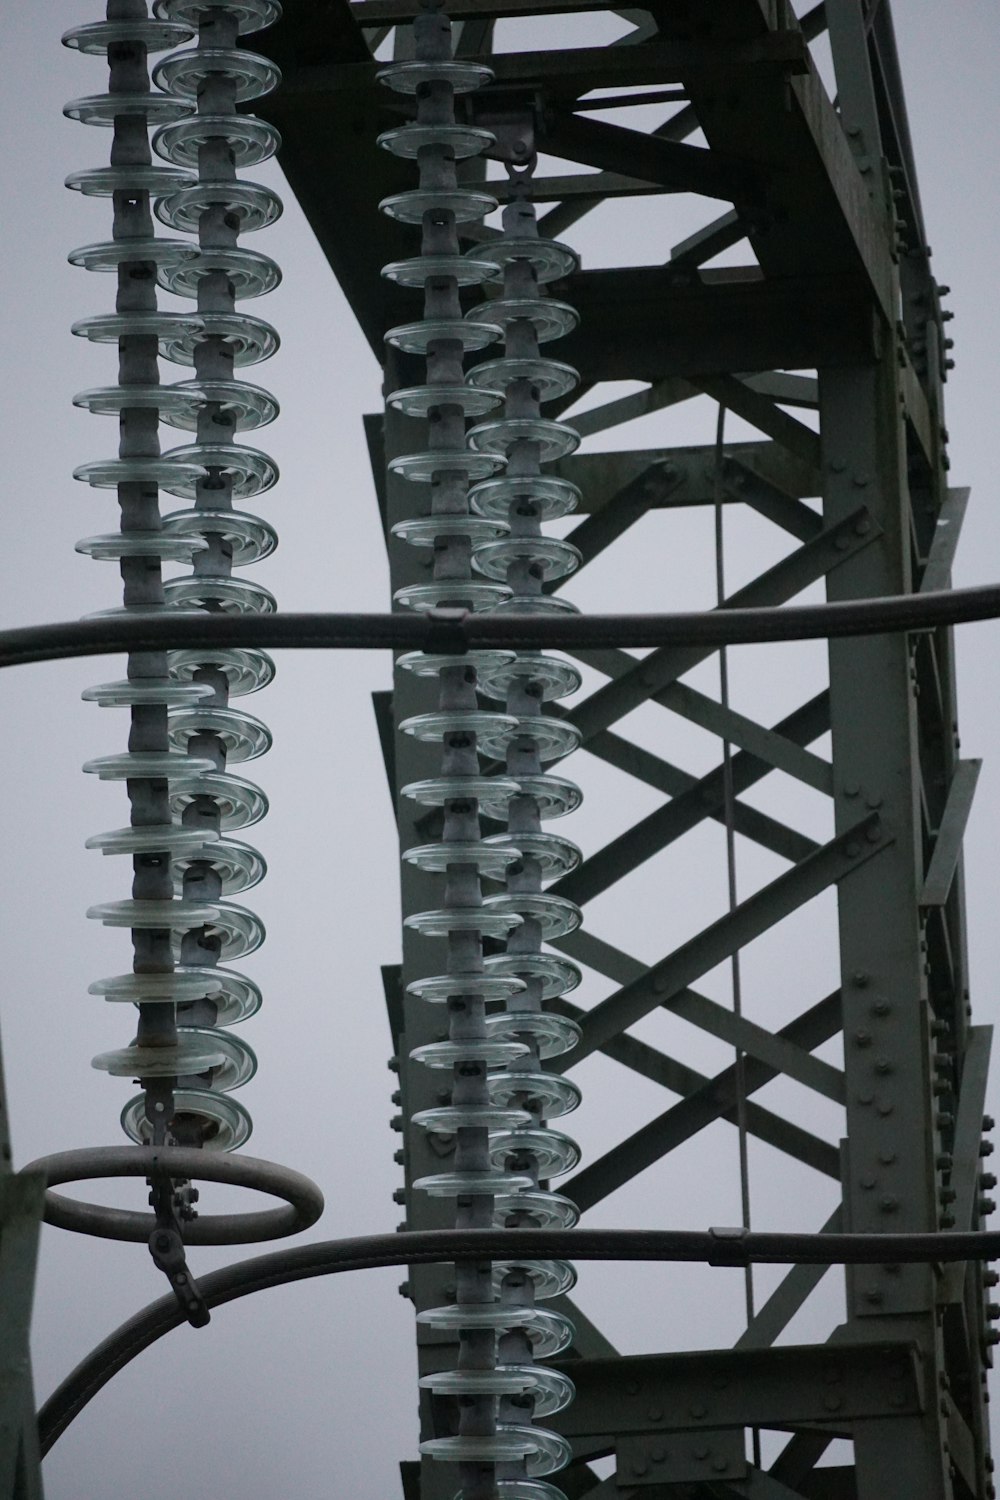 a close up of a metal structure with wires attached to it